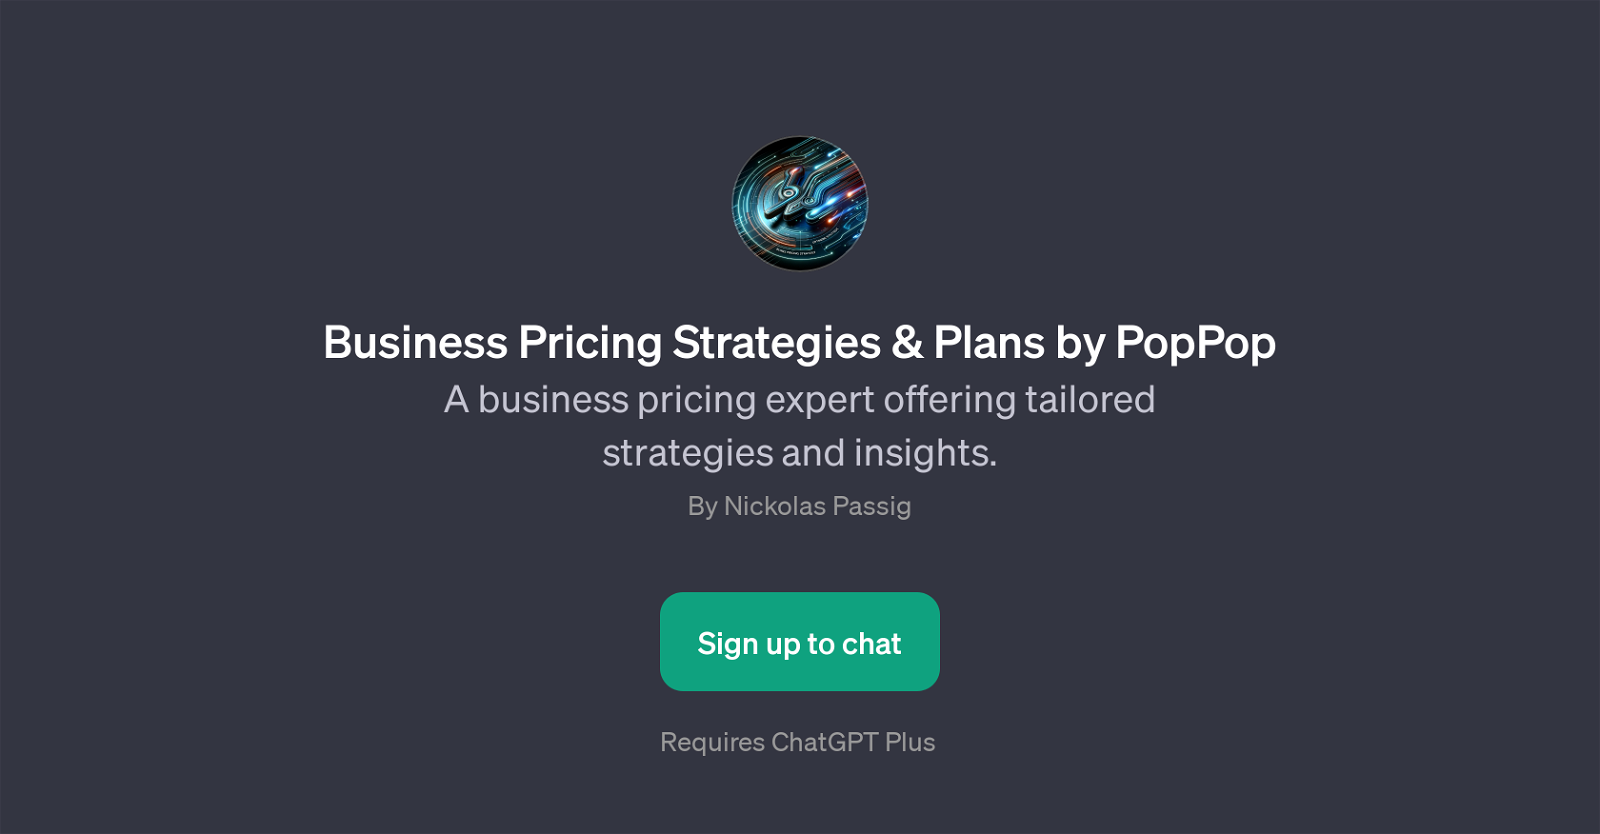 Business Pricing Strategies & Plans by PopPop website